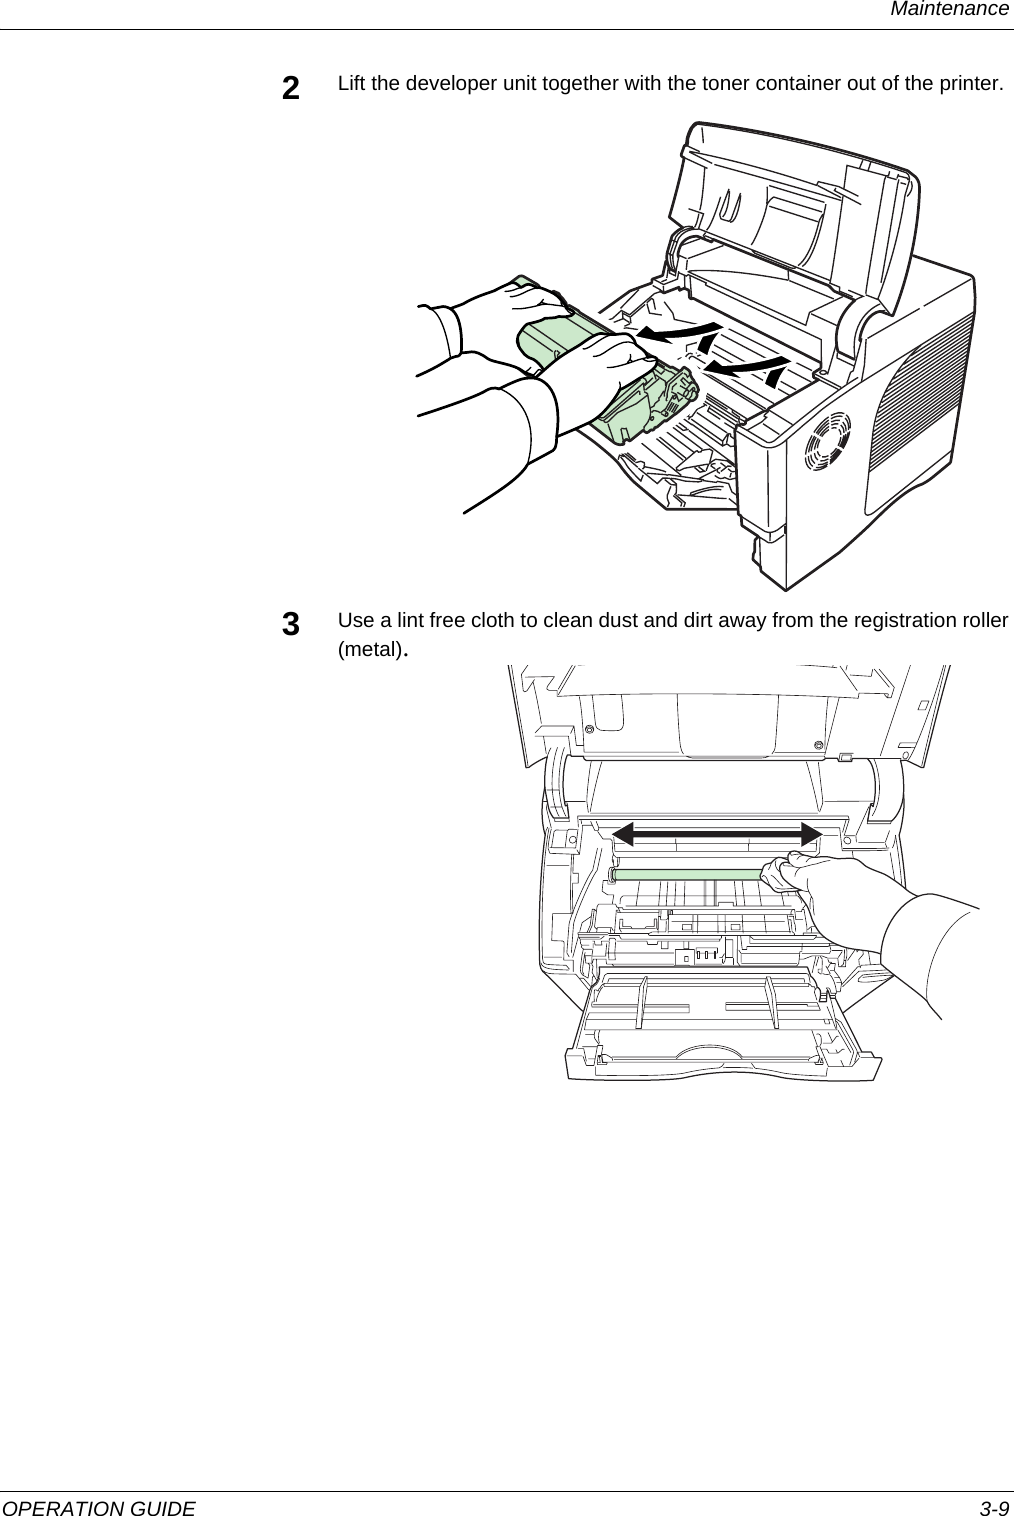 Maintenance OPERATION GUIDE 3-92Lift the developer unit together with the toner container out of the printer.3Use a lint free cloth to clean dust and dirt away from the registration roller (metal).